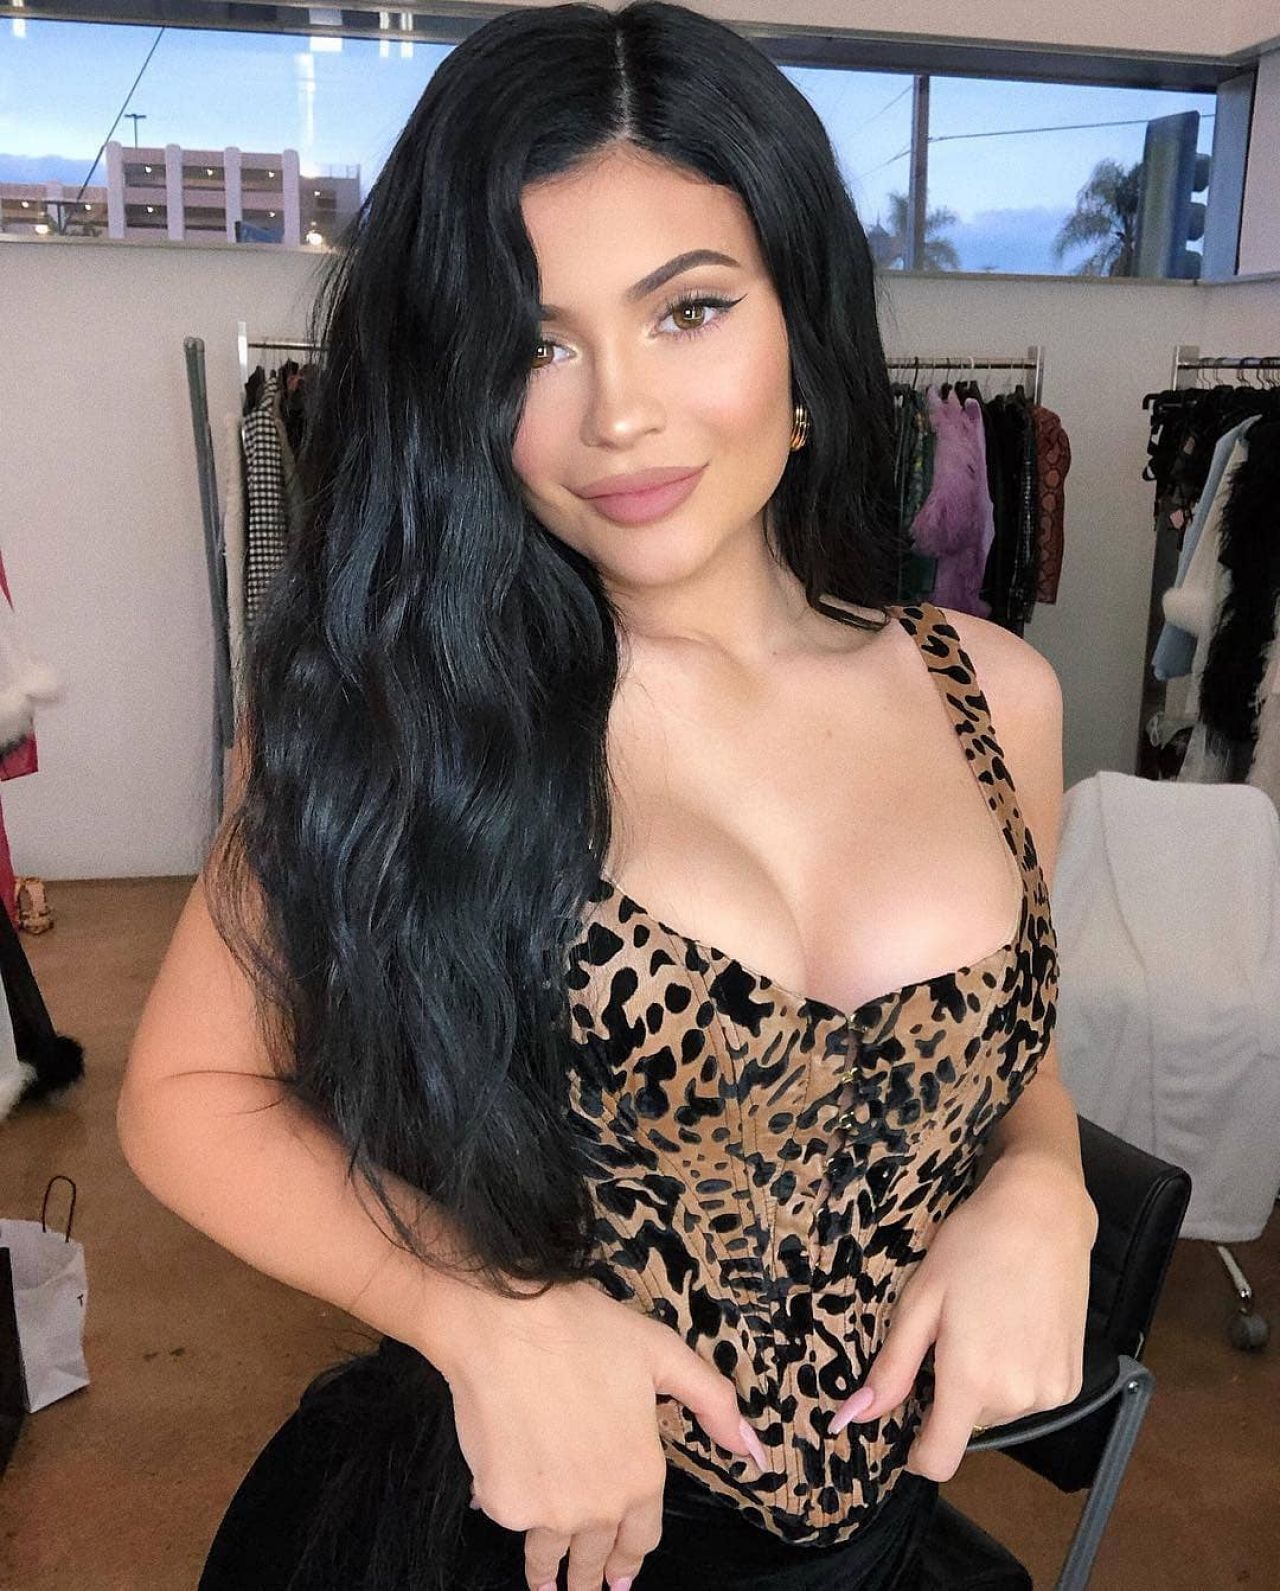 Kylie Jenner pretty fucking hot in personal photo. Great boobs!